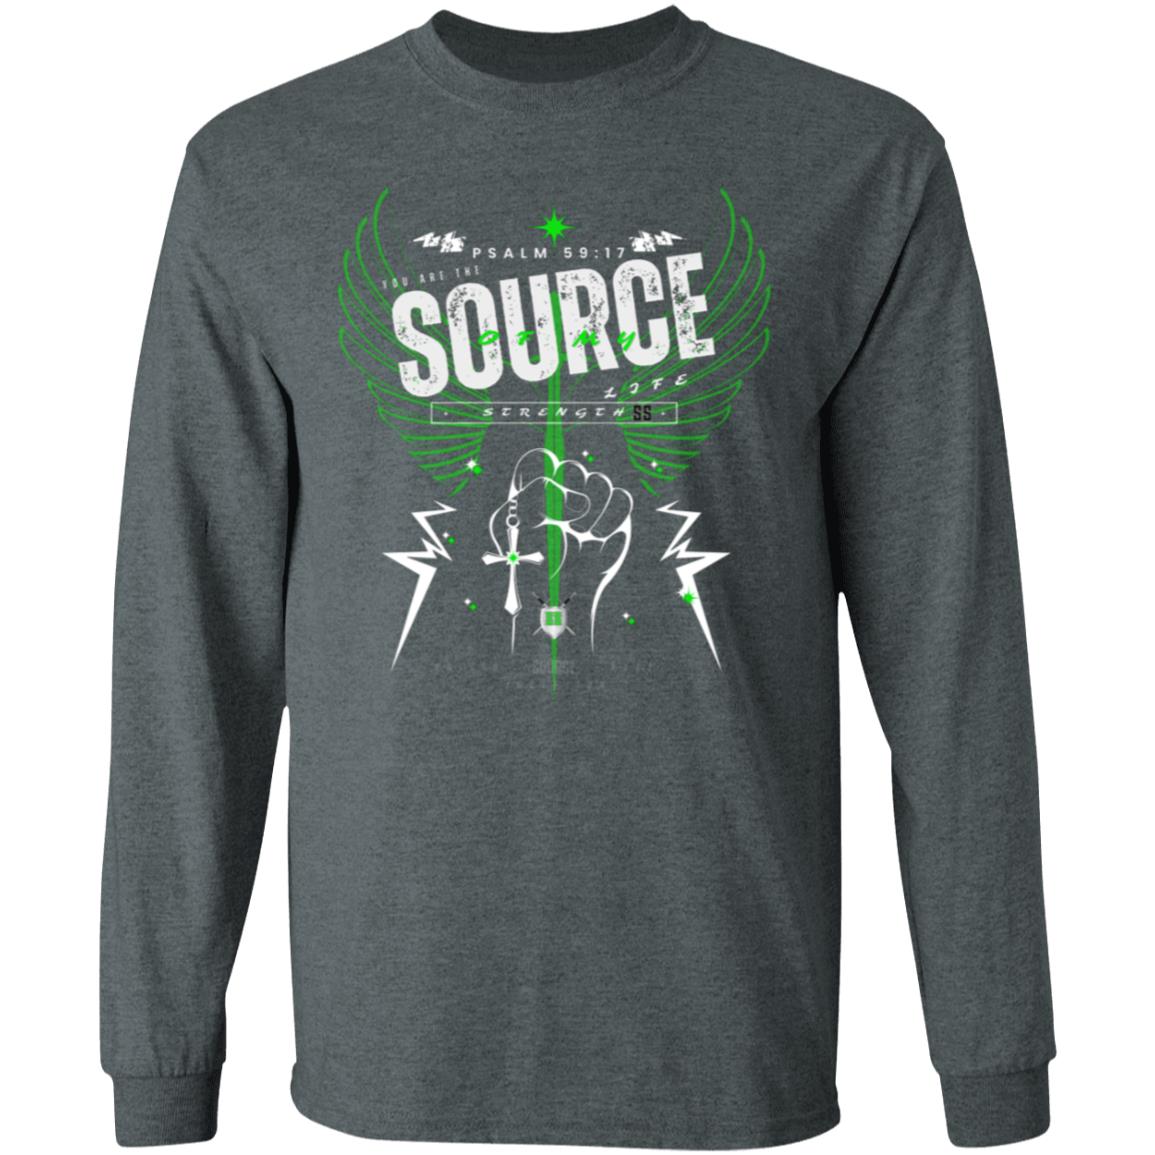 SOURCE Life and Strength Accent Green by42DPD LS T-Shirt